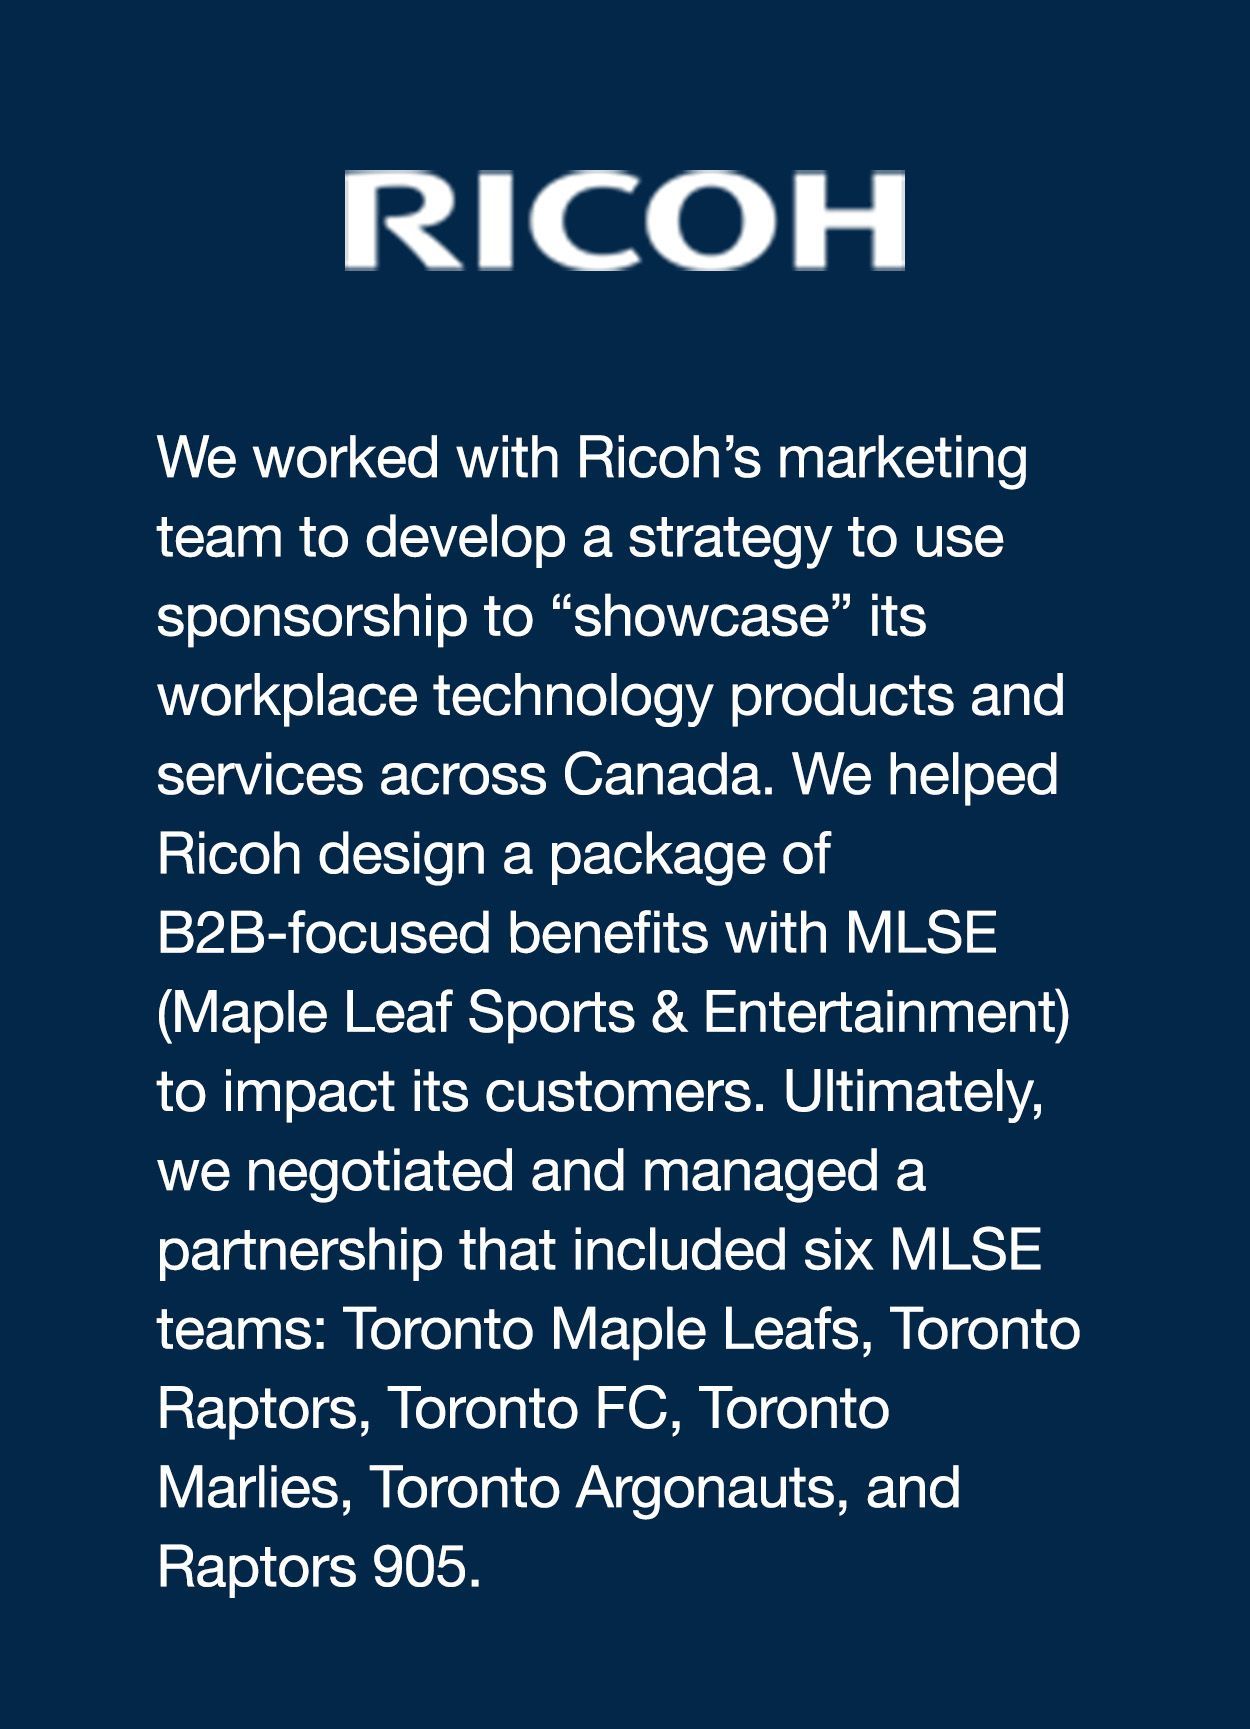 We worked with Ricoh’s marketing team to develop a strategy to use sponsorship to “showcase” its workplace technology products and services across Canada. We helped Ricoh design a package of B2B-focused benefits with MLSE (Maple Leaf Sports & Entertainment) to impact its customers. Ultimately, we negotiated and managed a partnership that included six MLSE teams: Toronto Maple Leafs, Toronto Raptors, Toronto FC, Toronto Marlies, Toronto Argonauts, and Raptors 905.